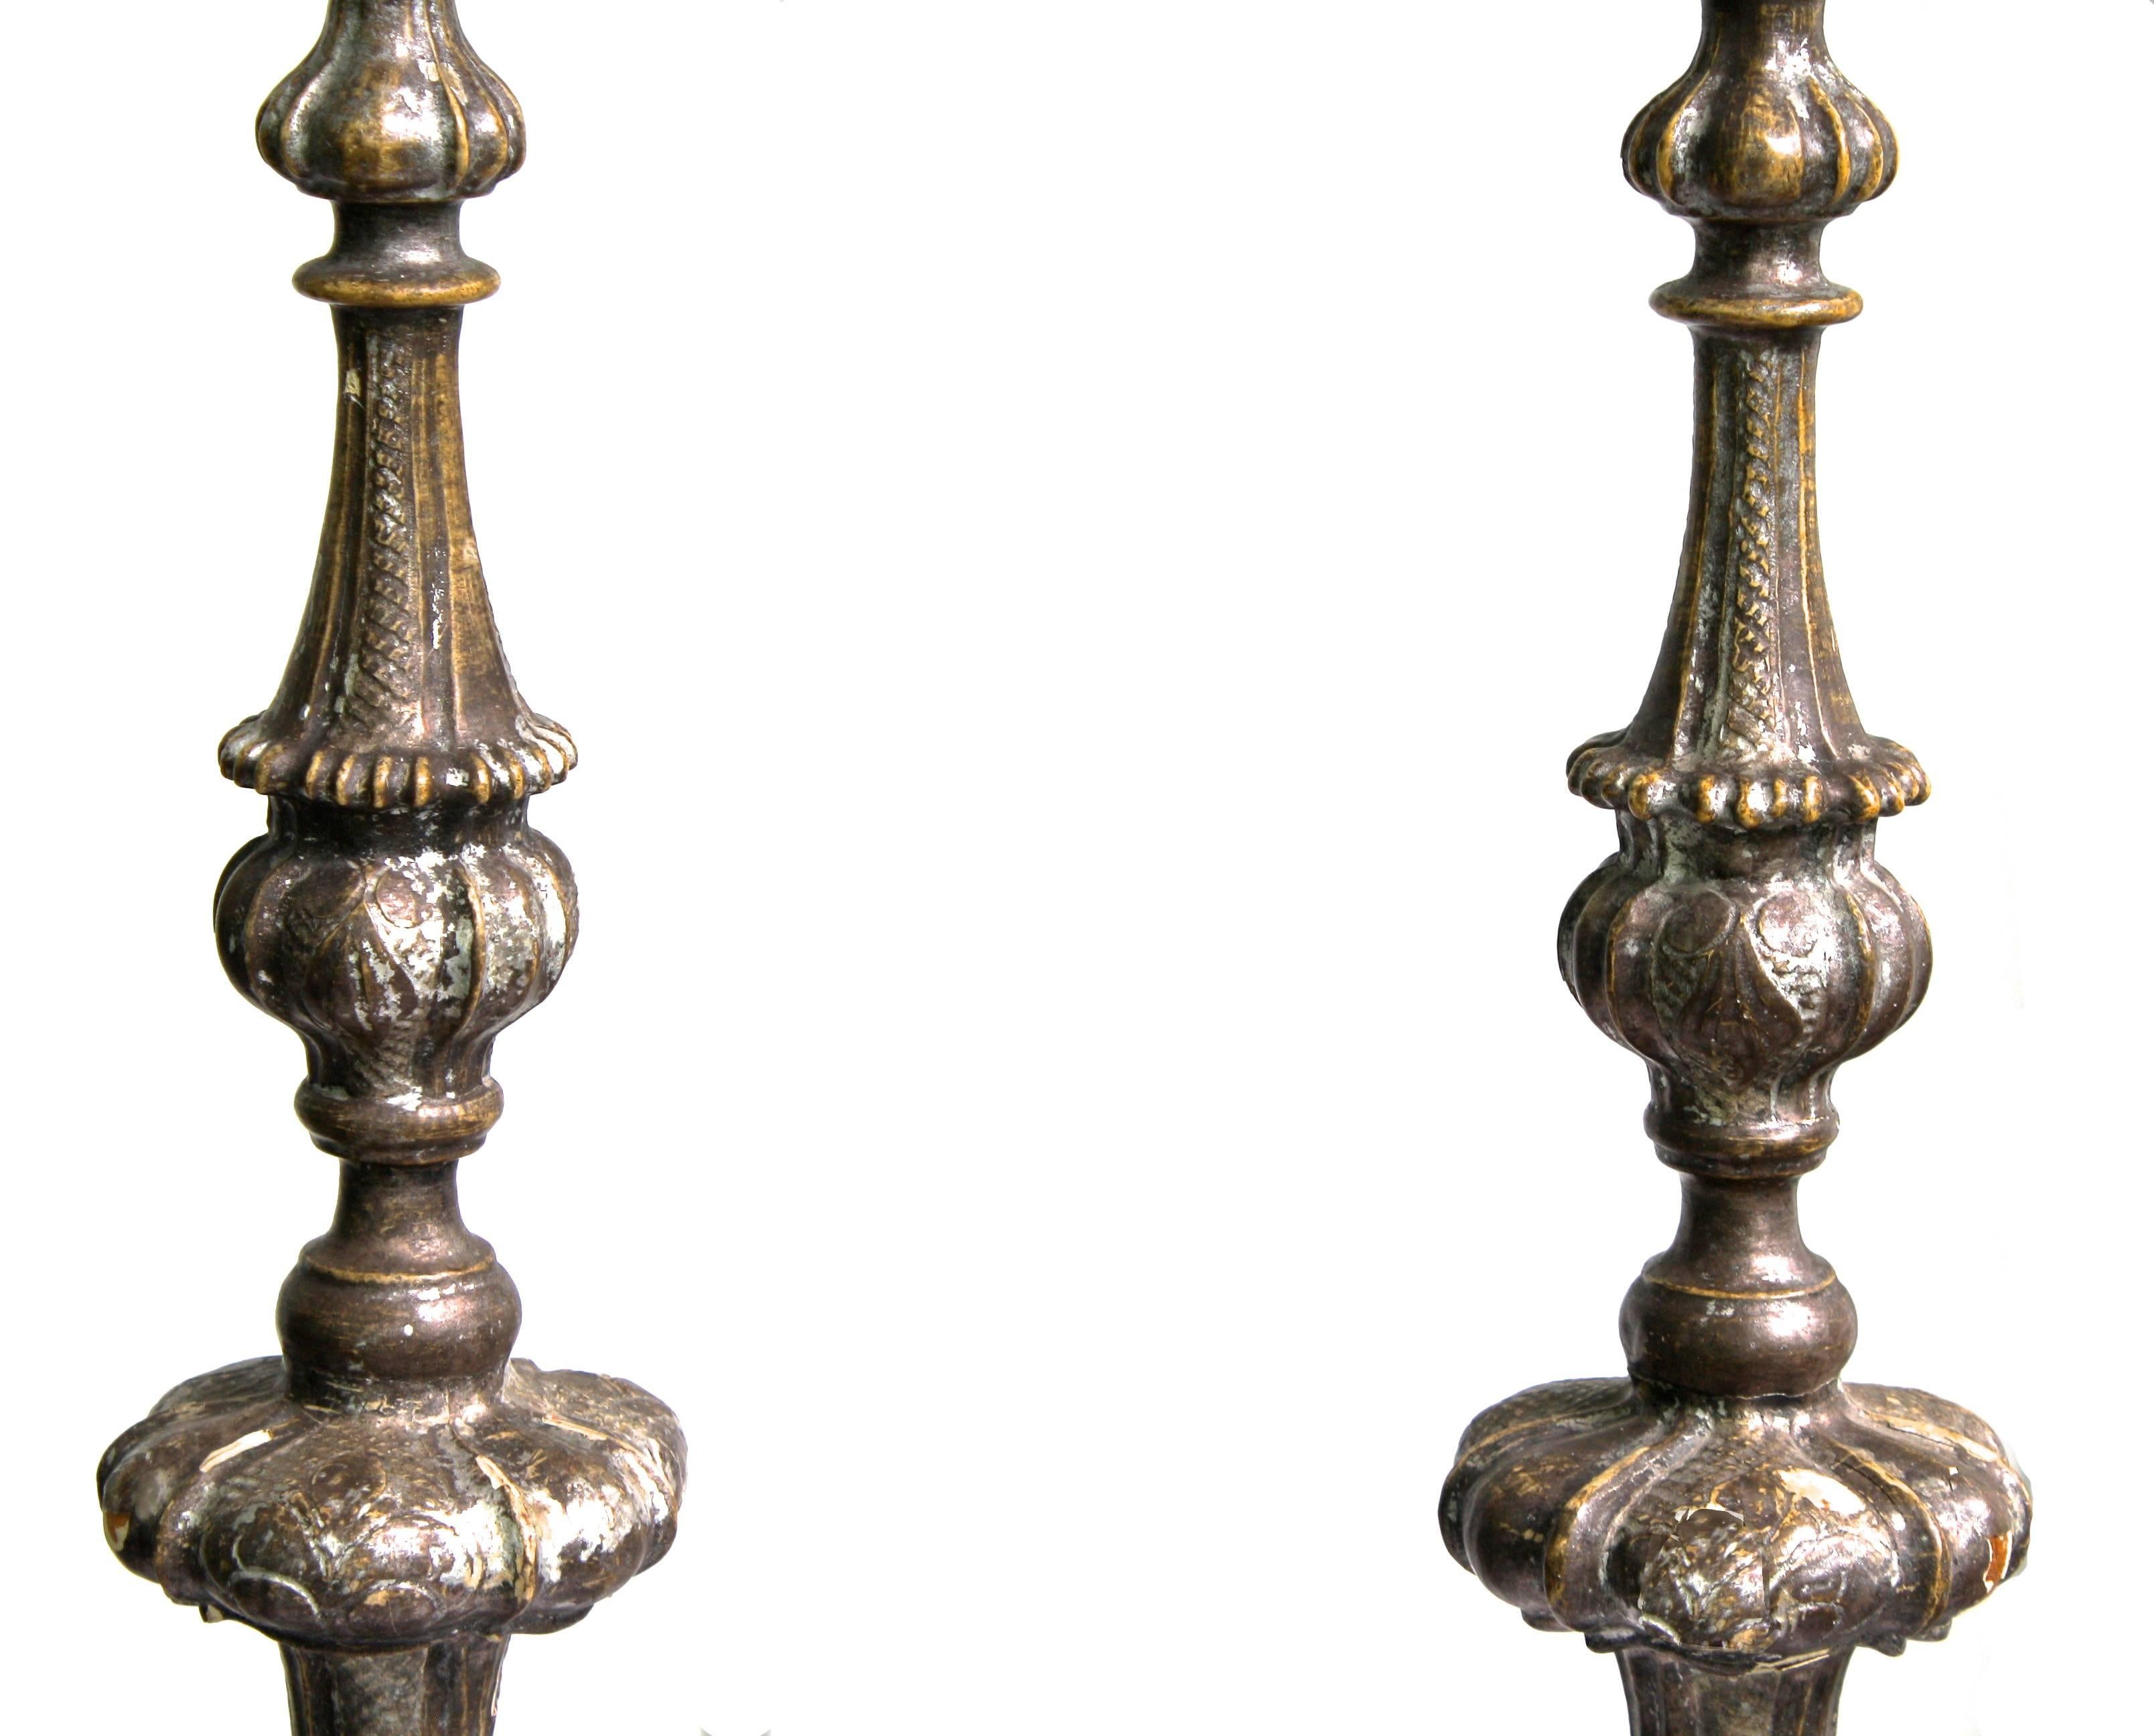 PAIR Italian Baroque Silver Gilt Prickets In Good Condition For Sale In Woodbury, CT